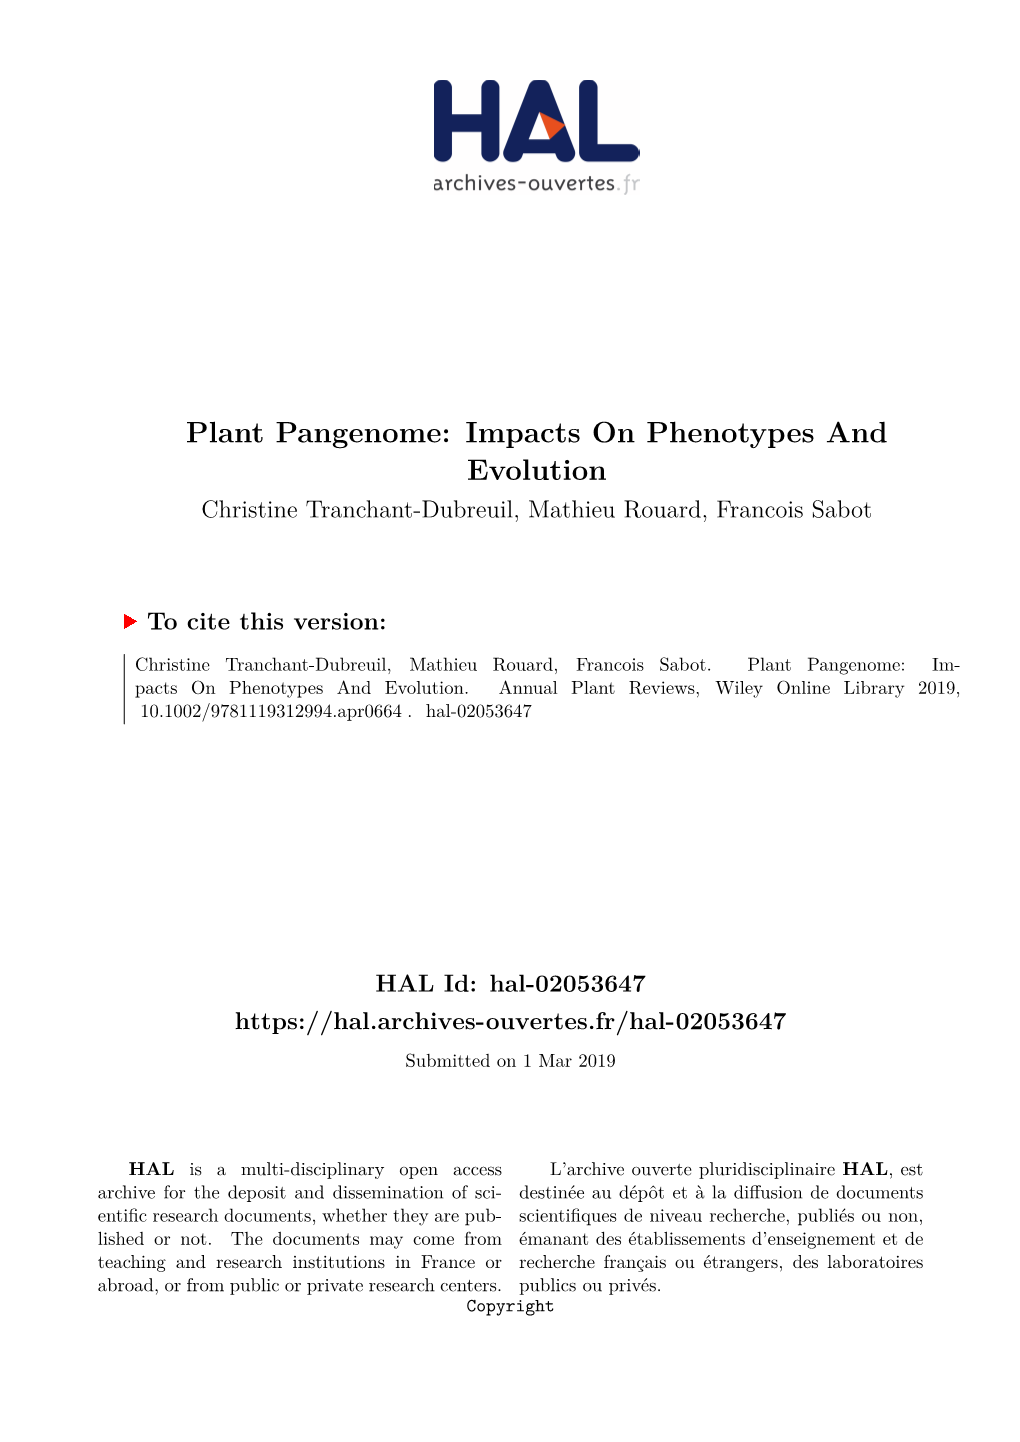 Plant Pangenome: Impacts on Phenotypes and Evolution Christine Tranchant-Dubreuil, Mathieu Rouard, Francois Sabot